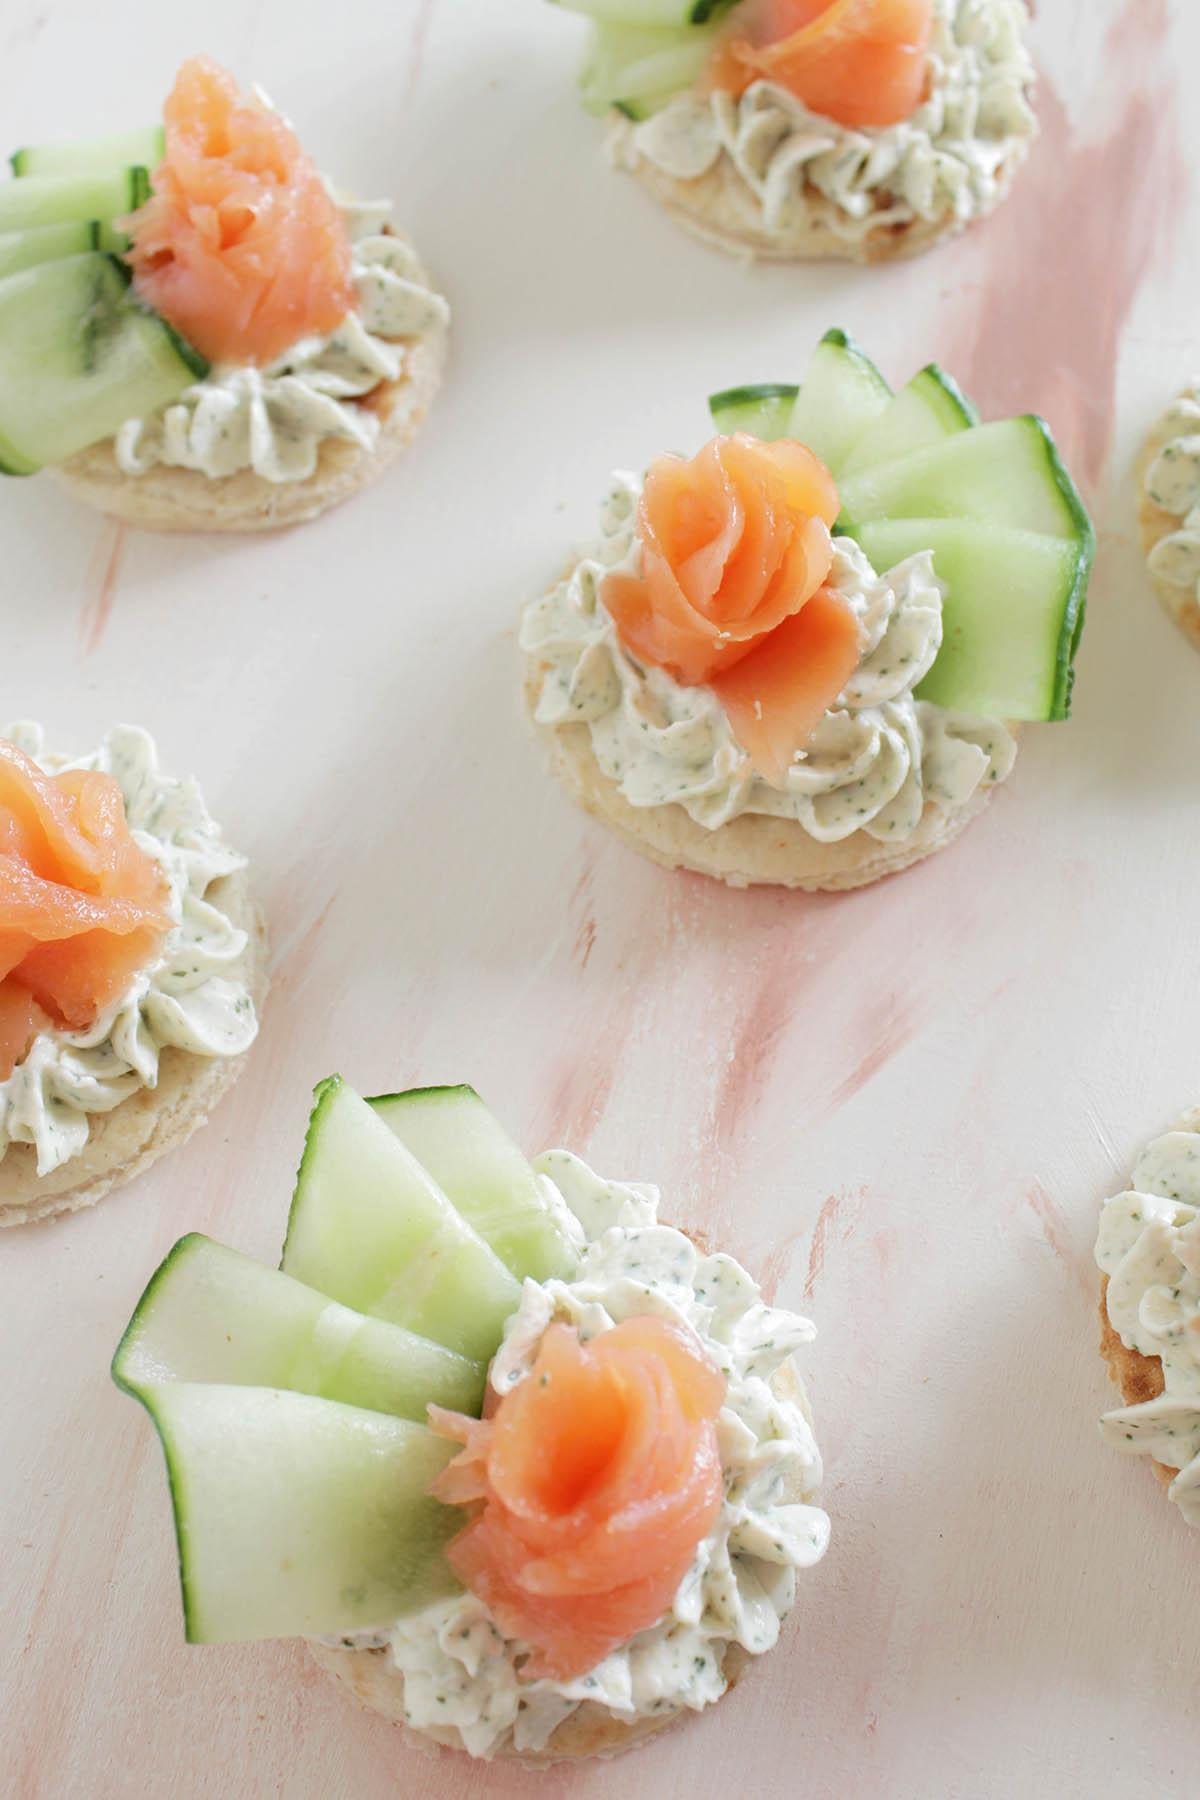 cream cheese spread with salmon rose.